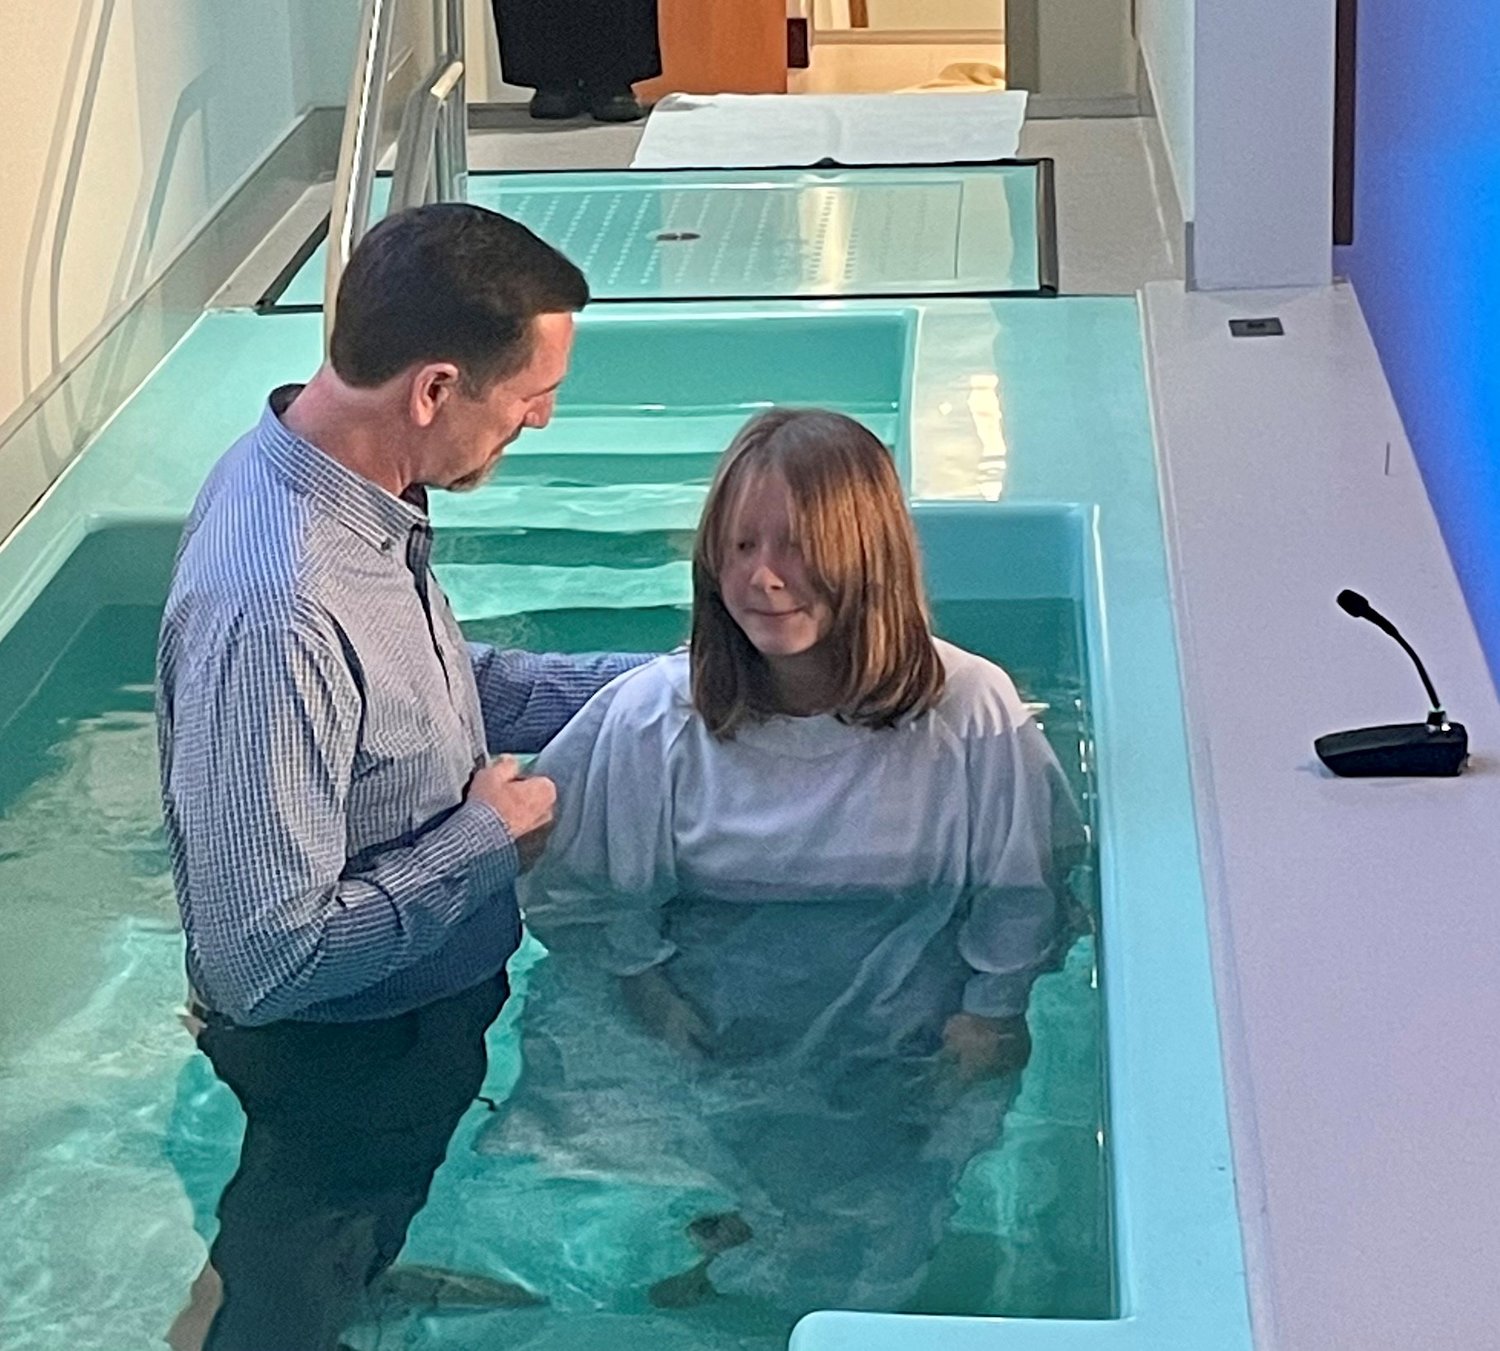 International Mission Board President Paul Chitwood baptizes his youngest daughter, Lilly, at their church in Glen Allen, Va.